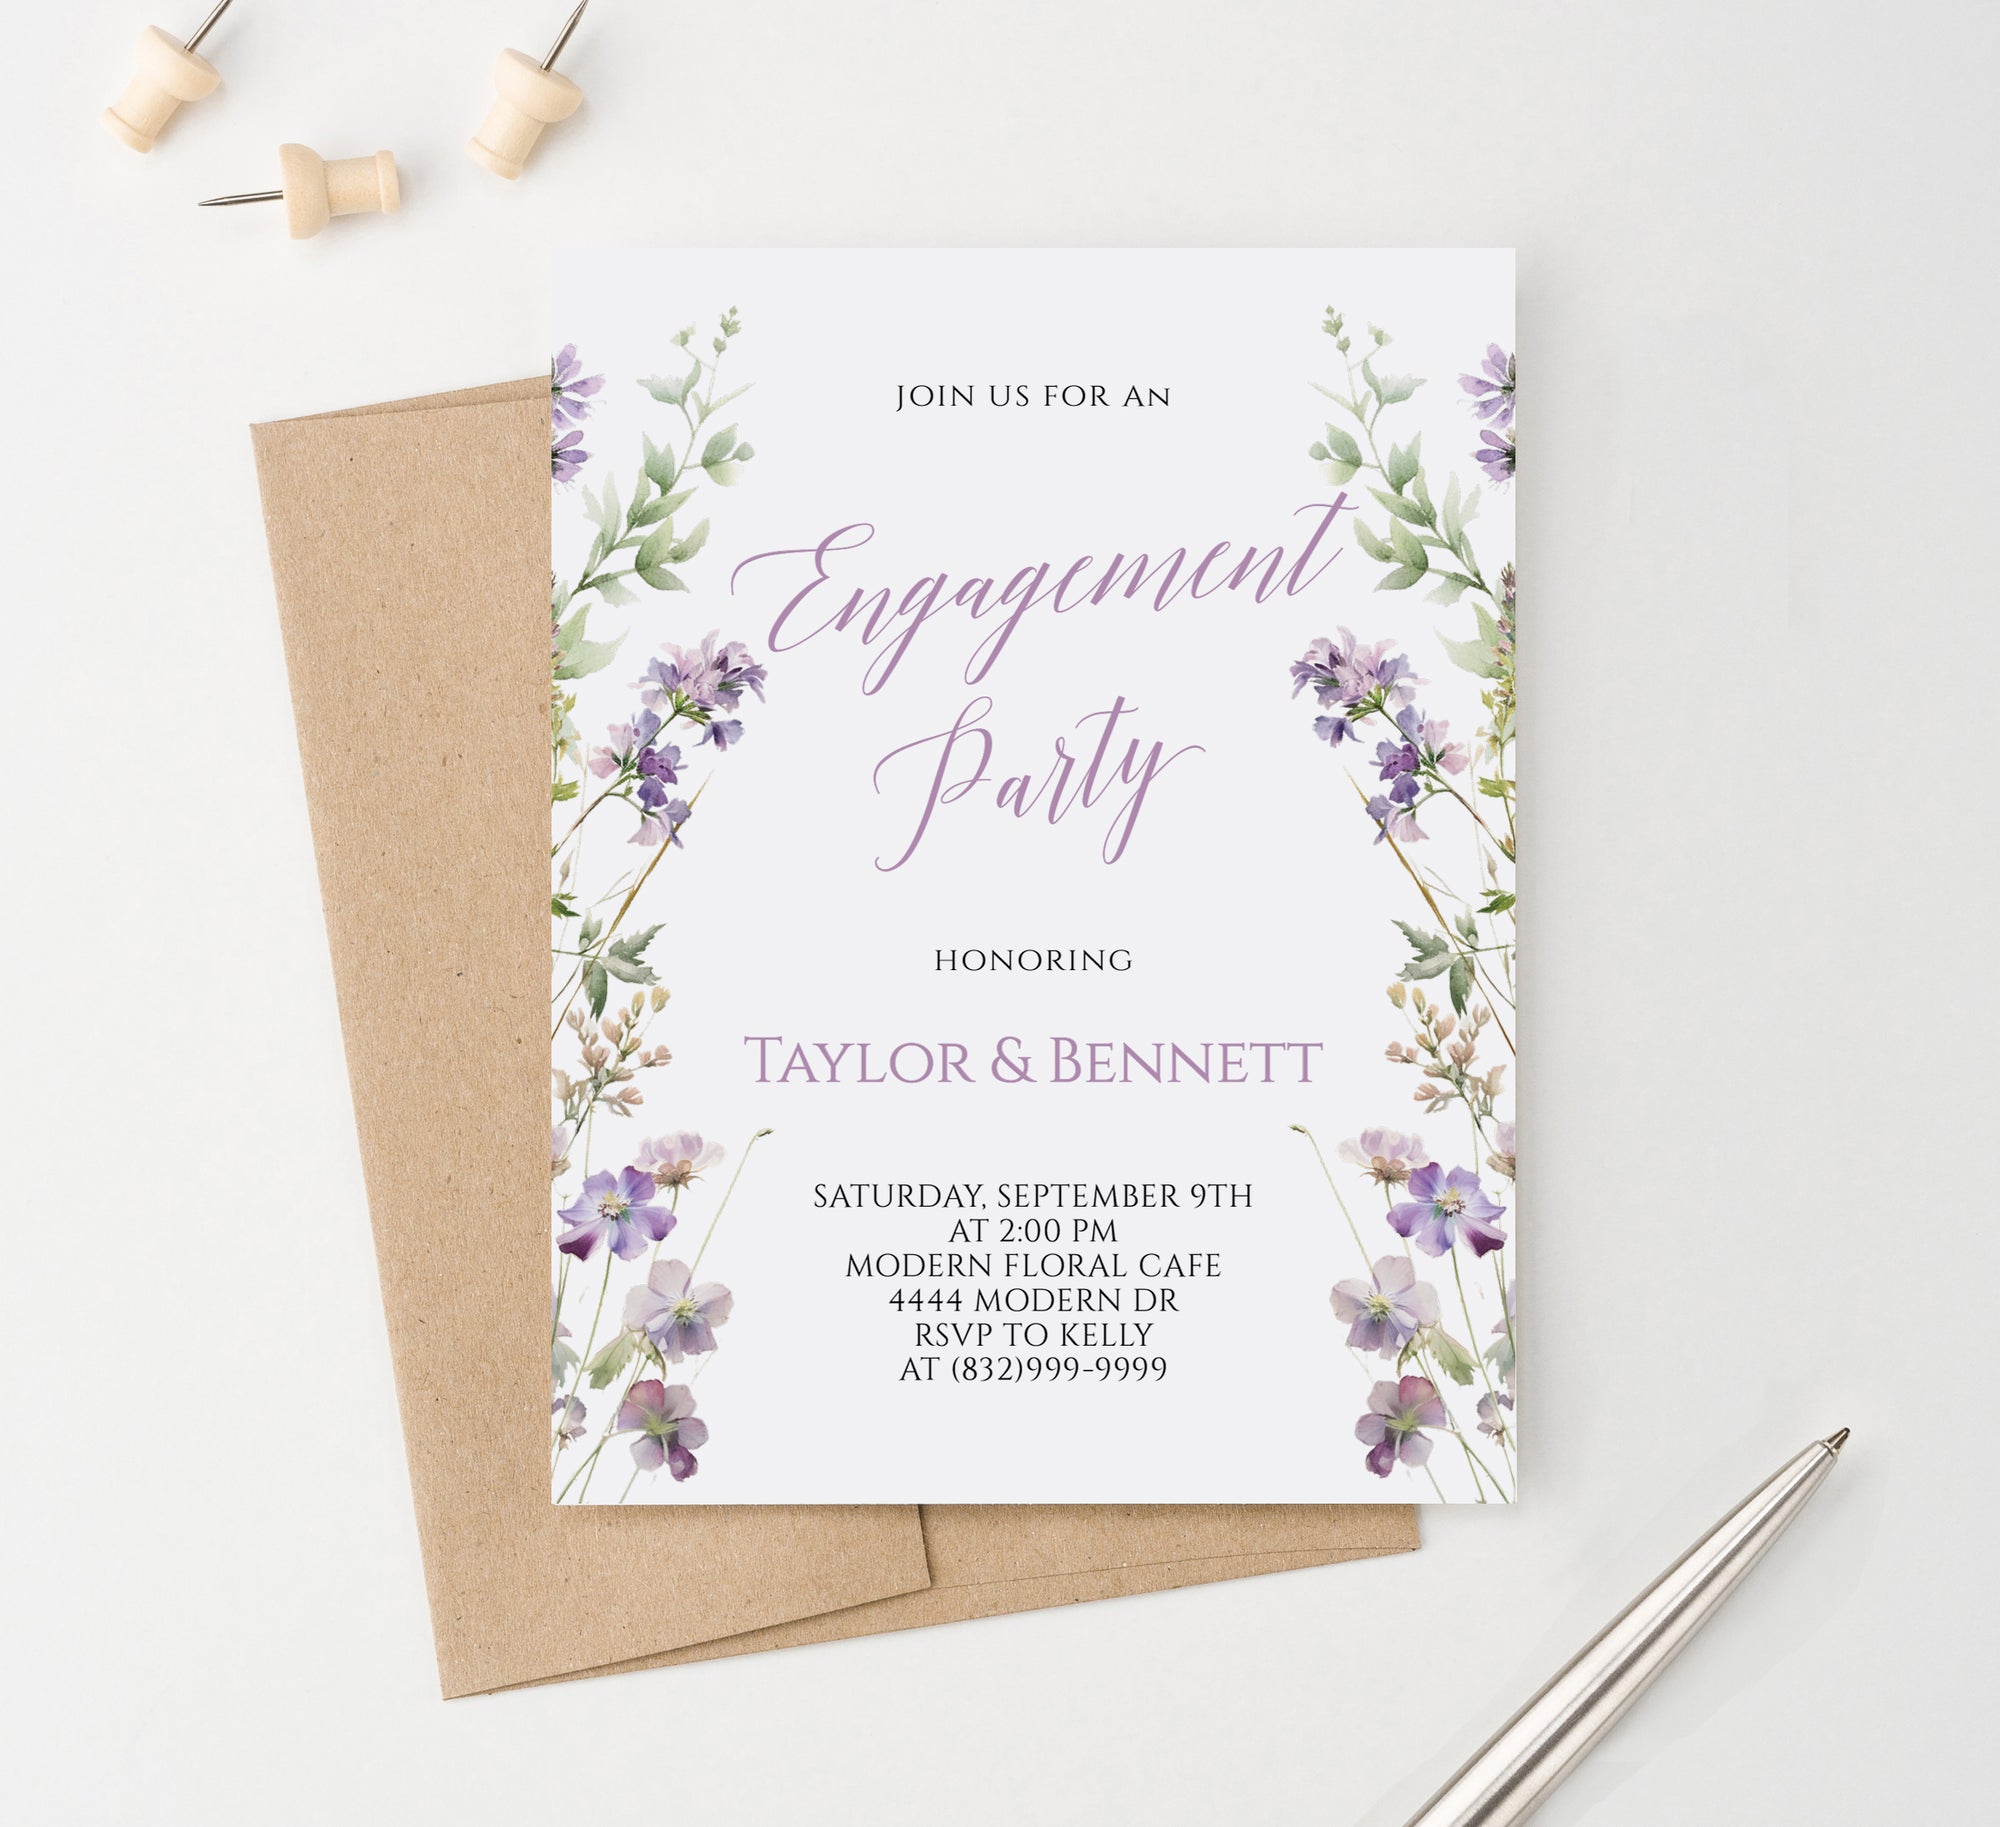 Classy Engagement Invitations With Purple Florals